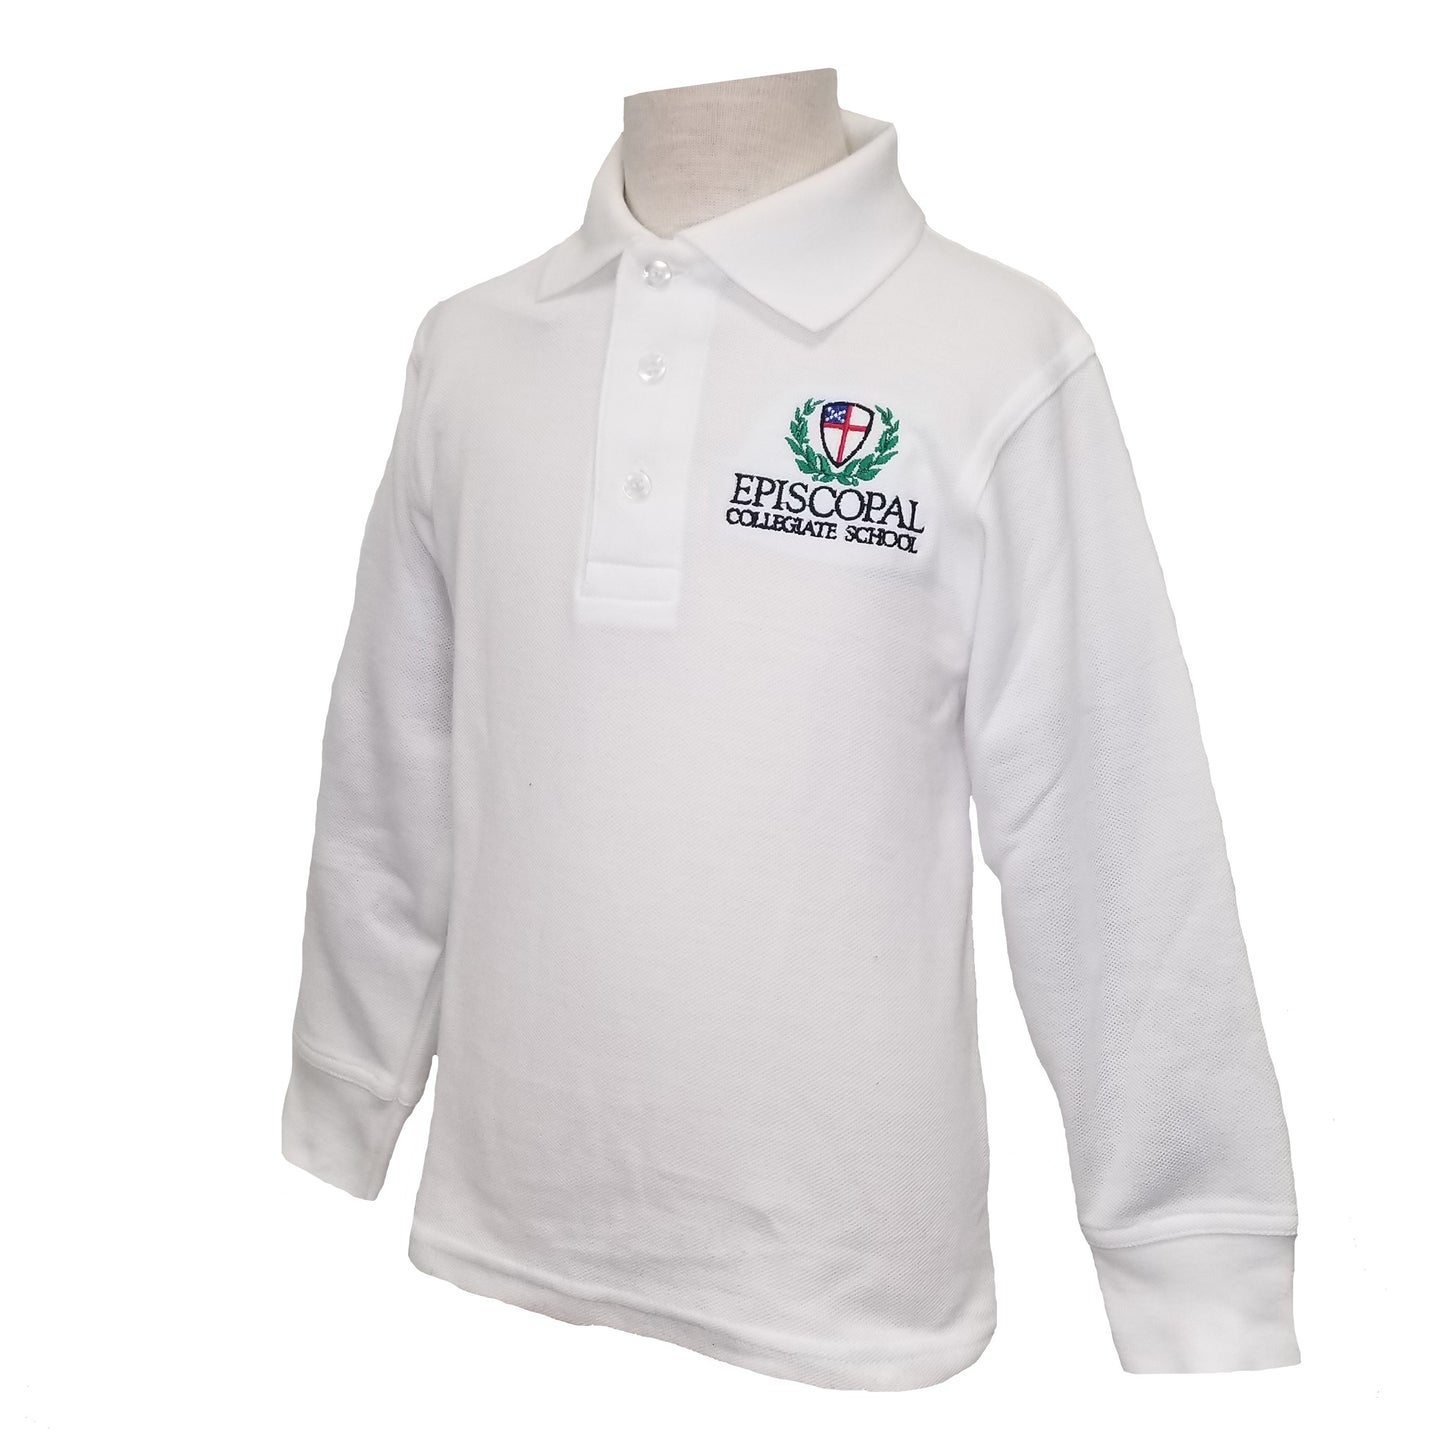 Youth Long Sleeve Polo With Episcopal Collegiate School Logo